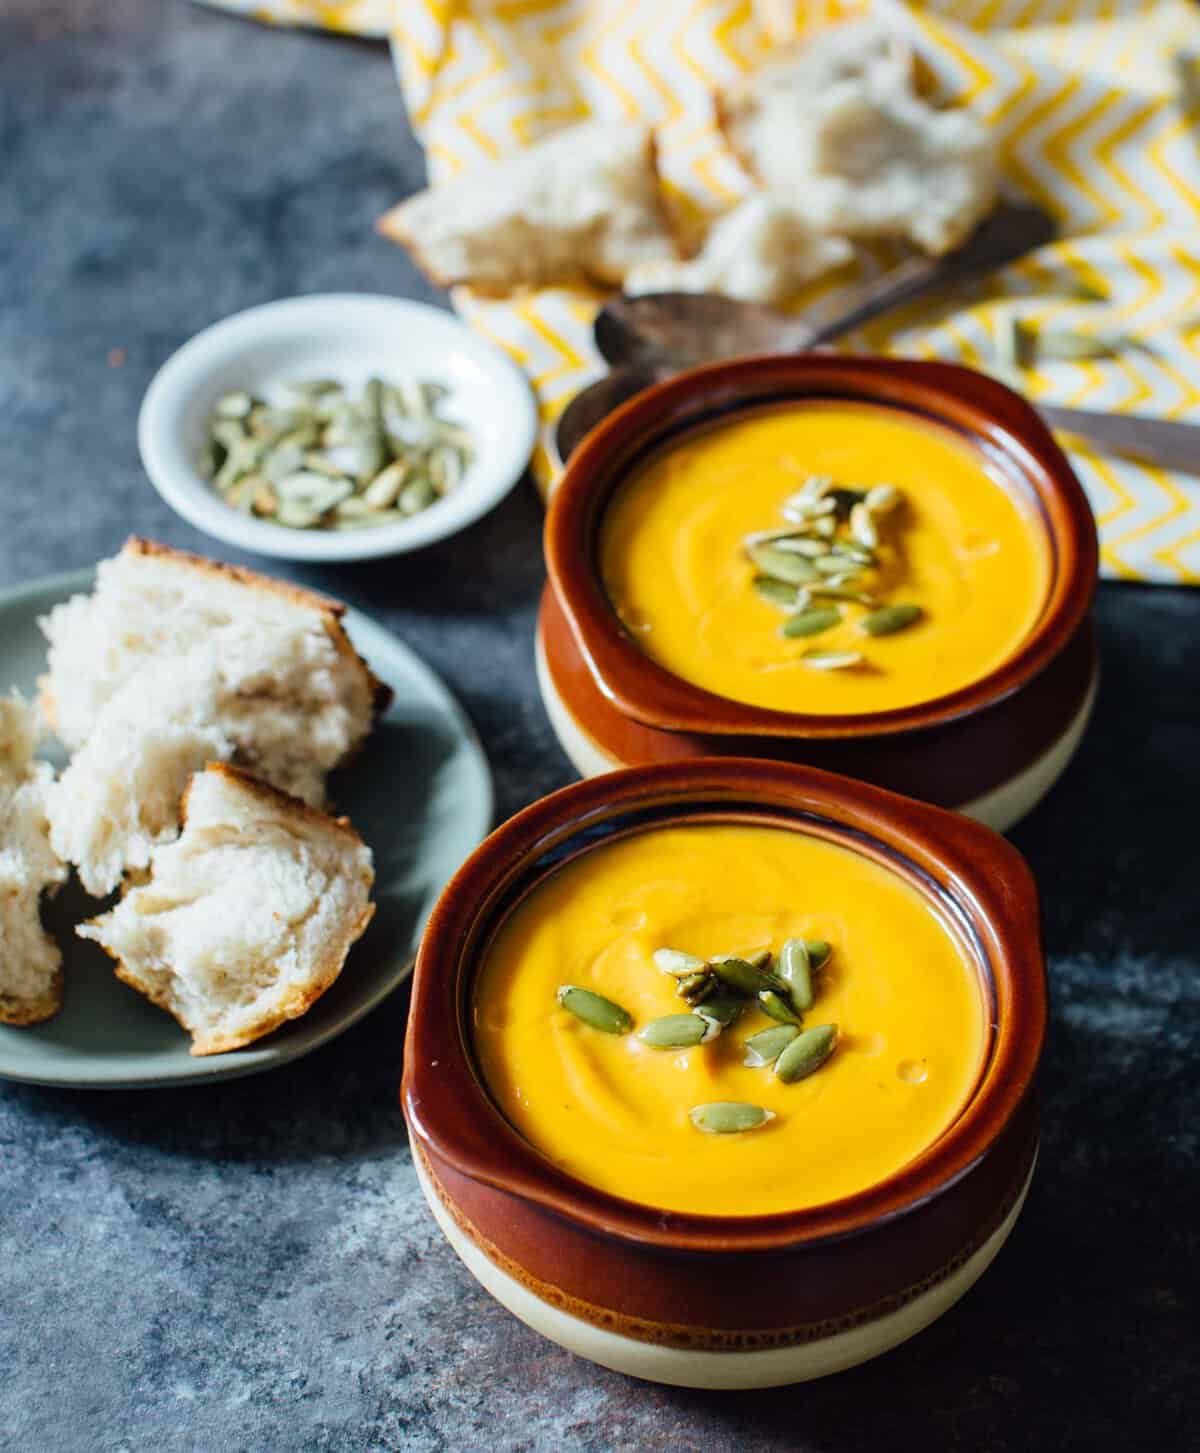 A creamy seasonal soup that you can have year-round. This Instant Pot autumn harvest butternut squash soup is a copycat from Panera that you know and love! #butternutsquash #soup #recipes #souprecipes #panera #paneracopycat #squashrecipes #falleats